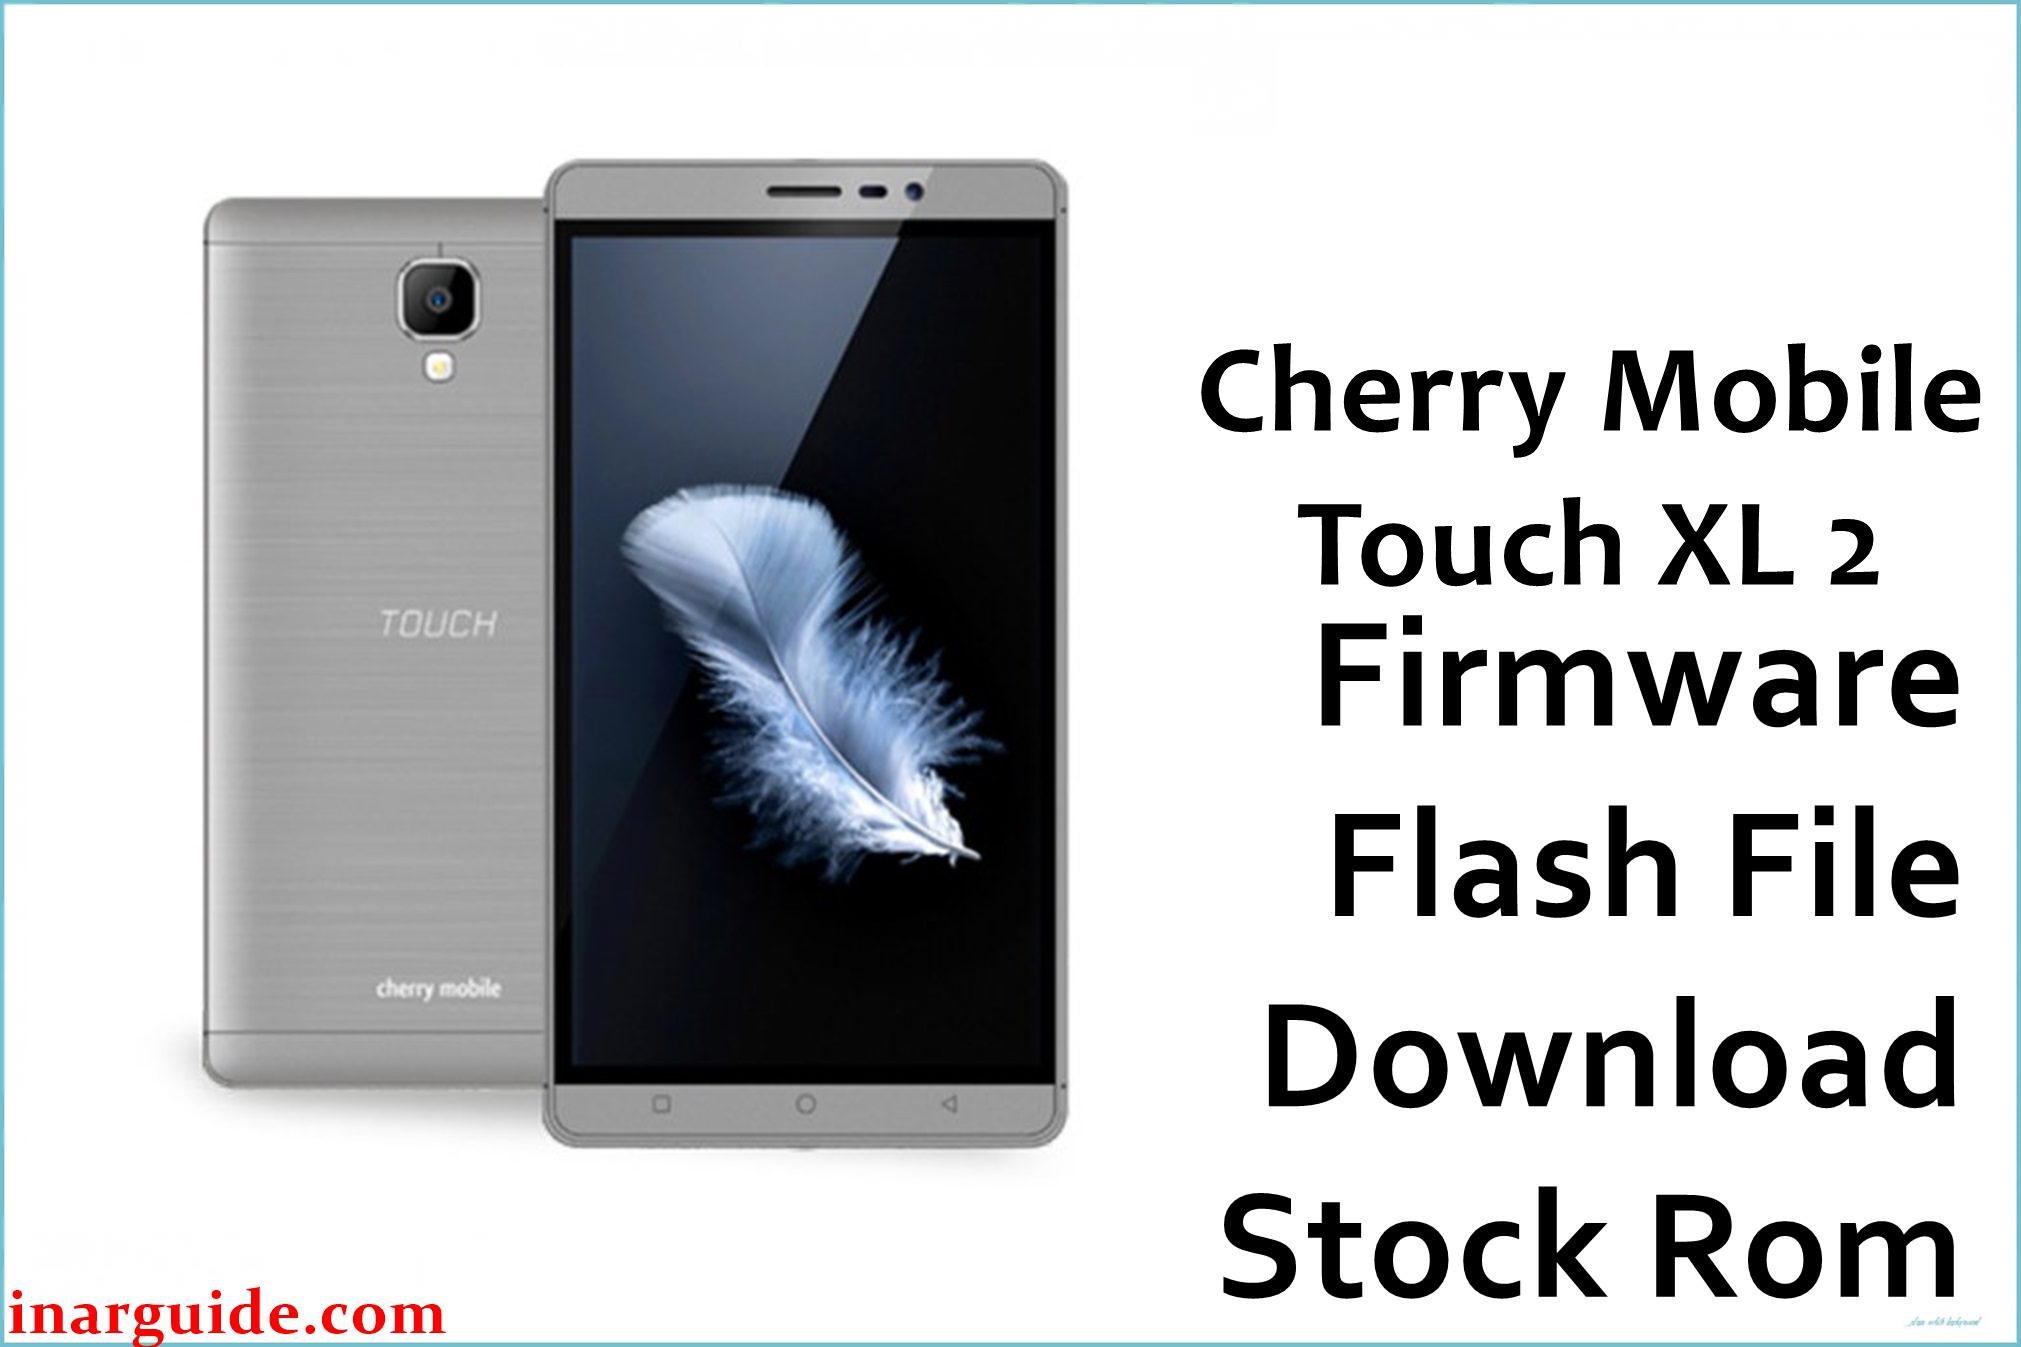 Cherry Mobile Touch XL 2